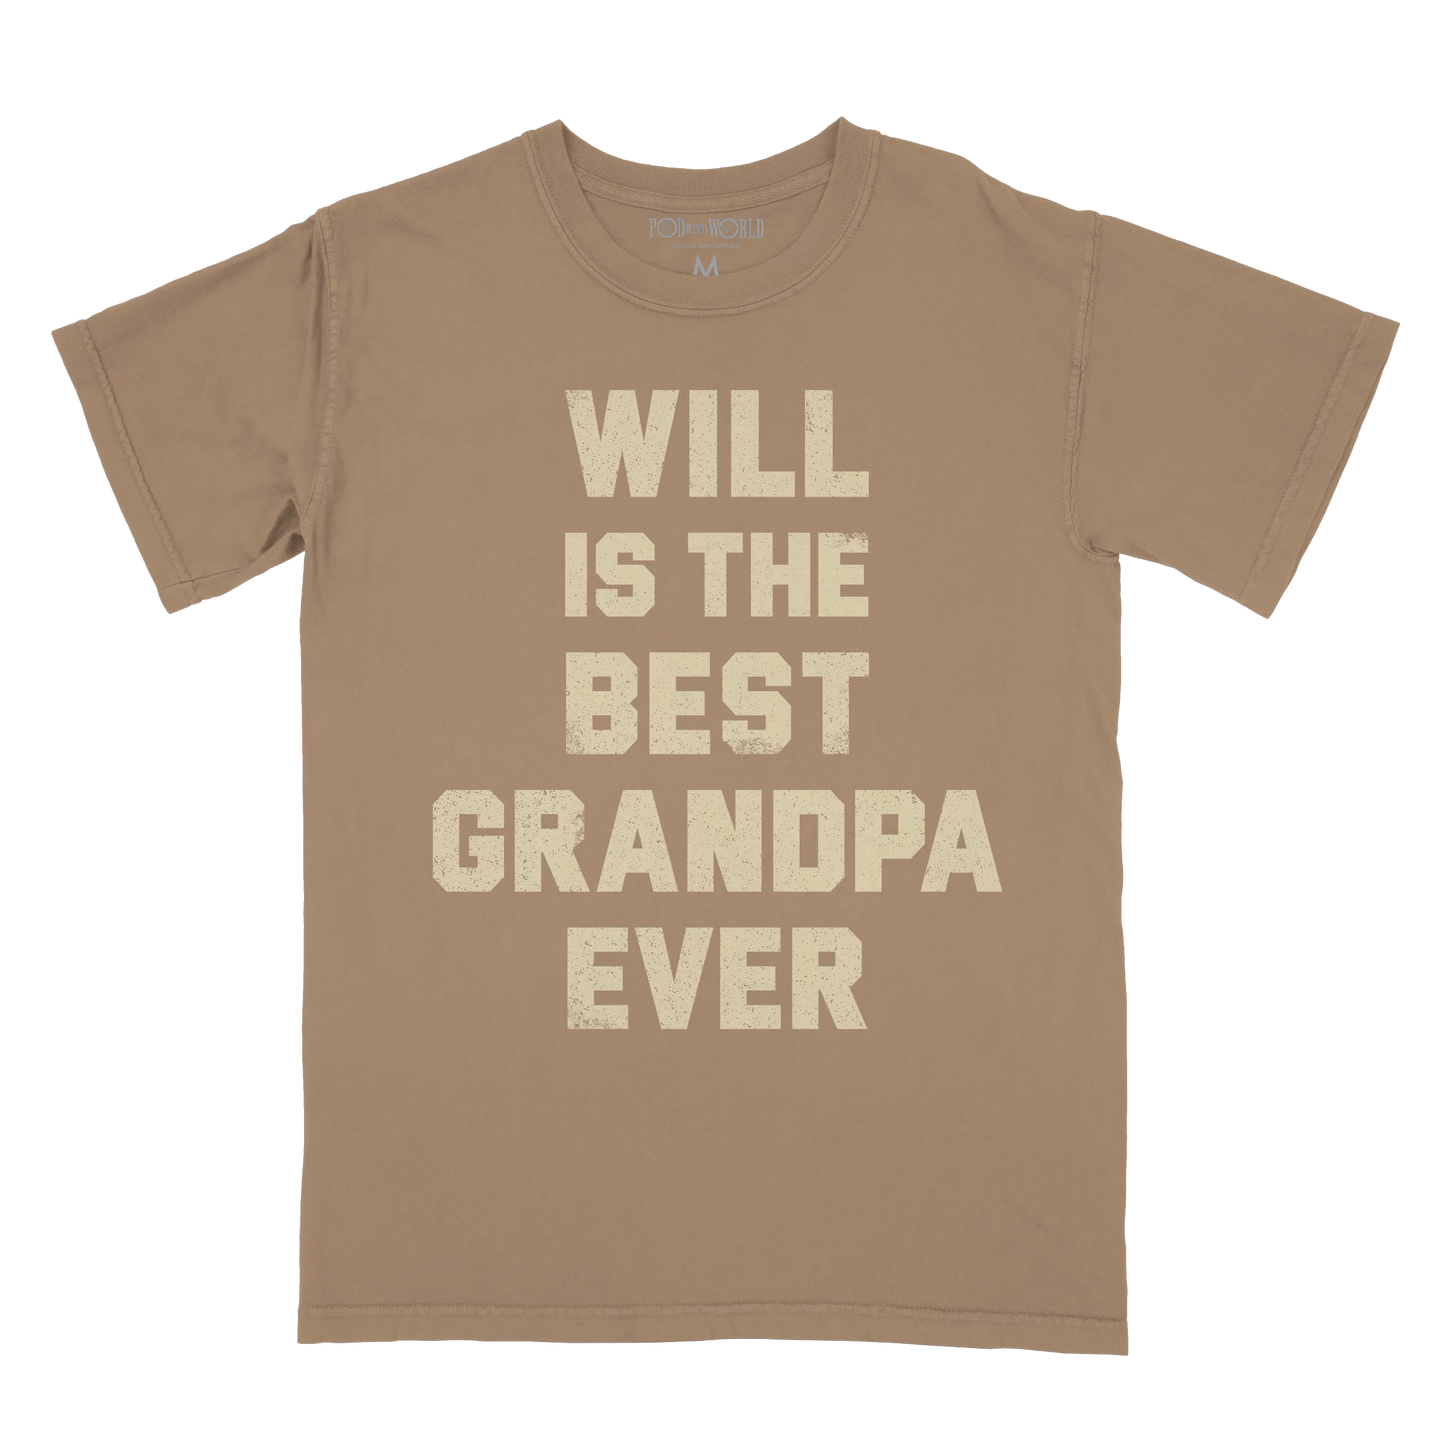 WILL GRANDPA - LIMITED TIME ONLY!